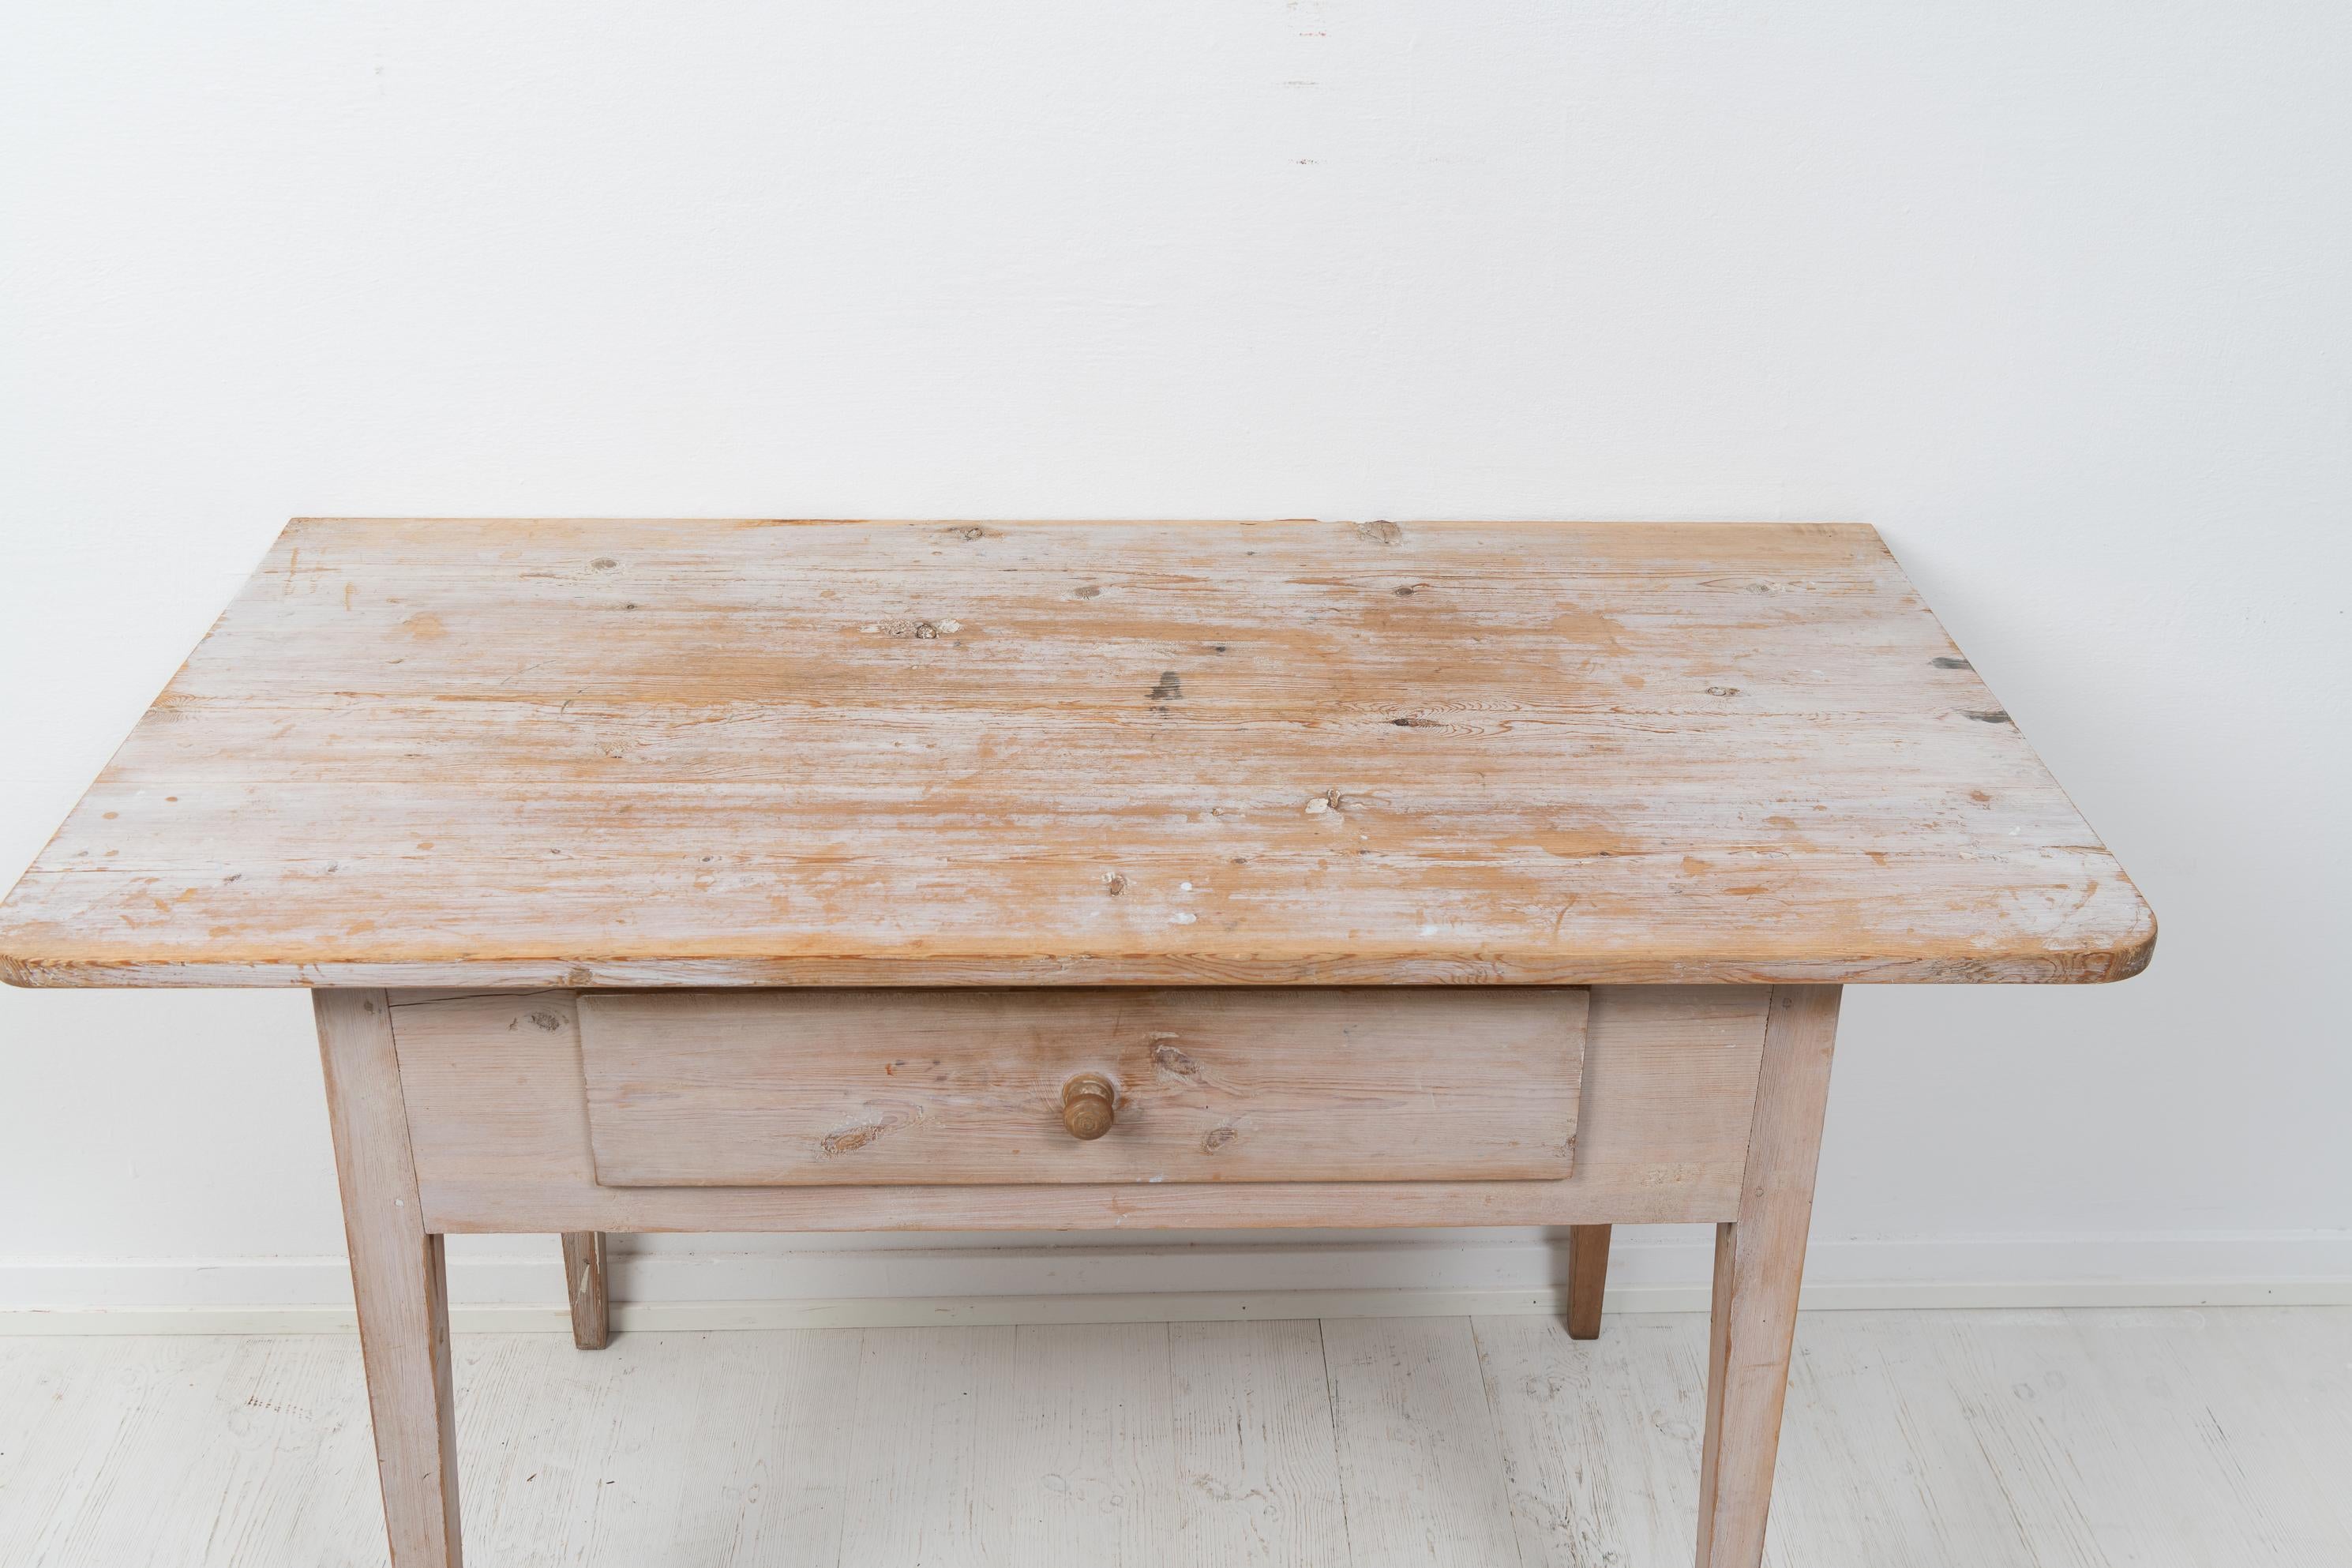 Genuine Antique Swedish Handmade Folk Art Pine Rustic Table with Drawer For Sale 2